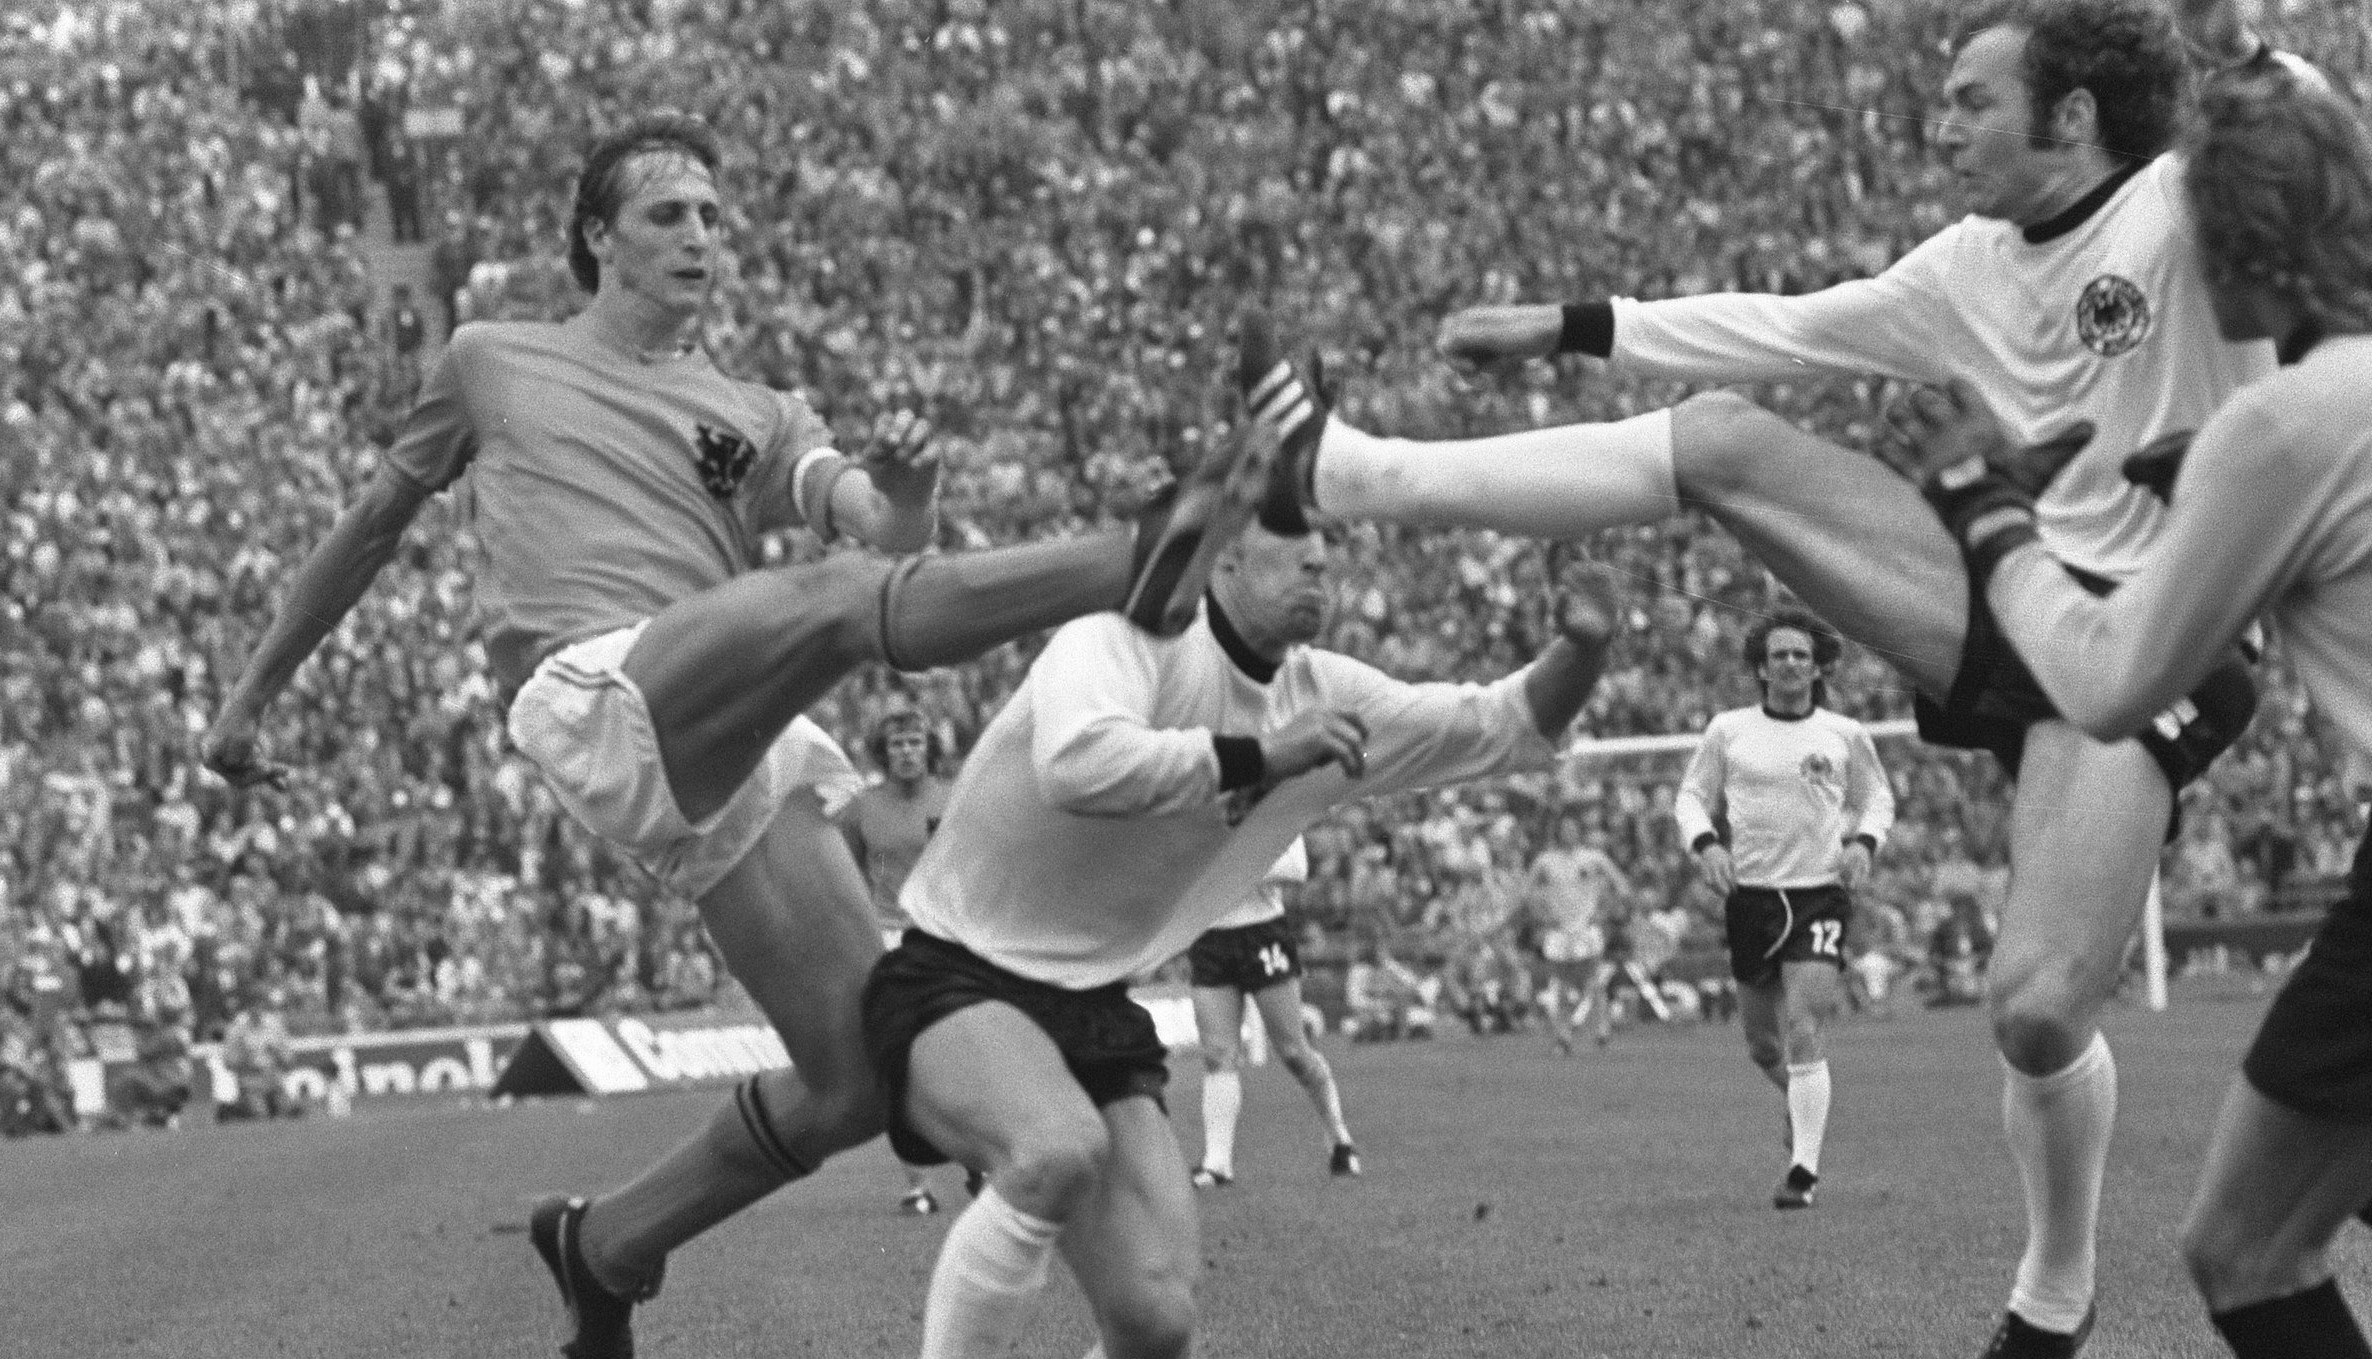 1974 FIFA World Cup Final, Netherlands 1-2 West Germany